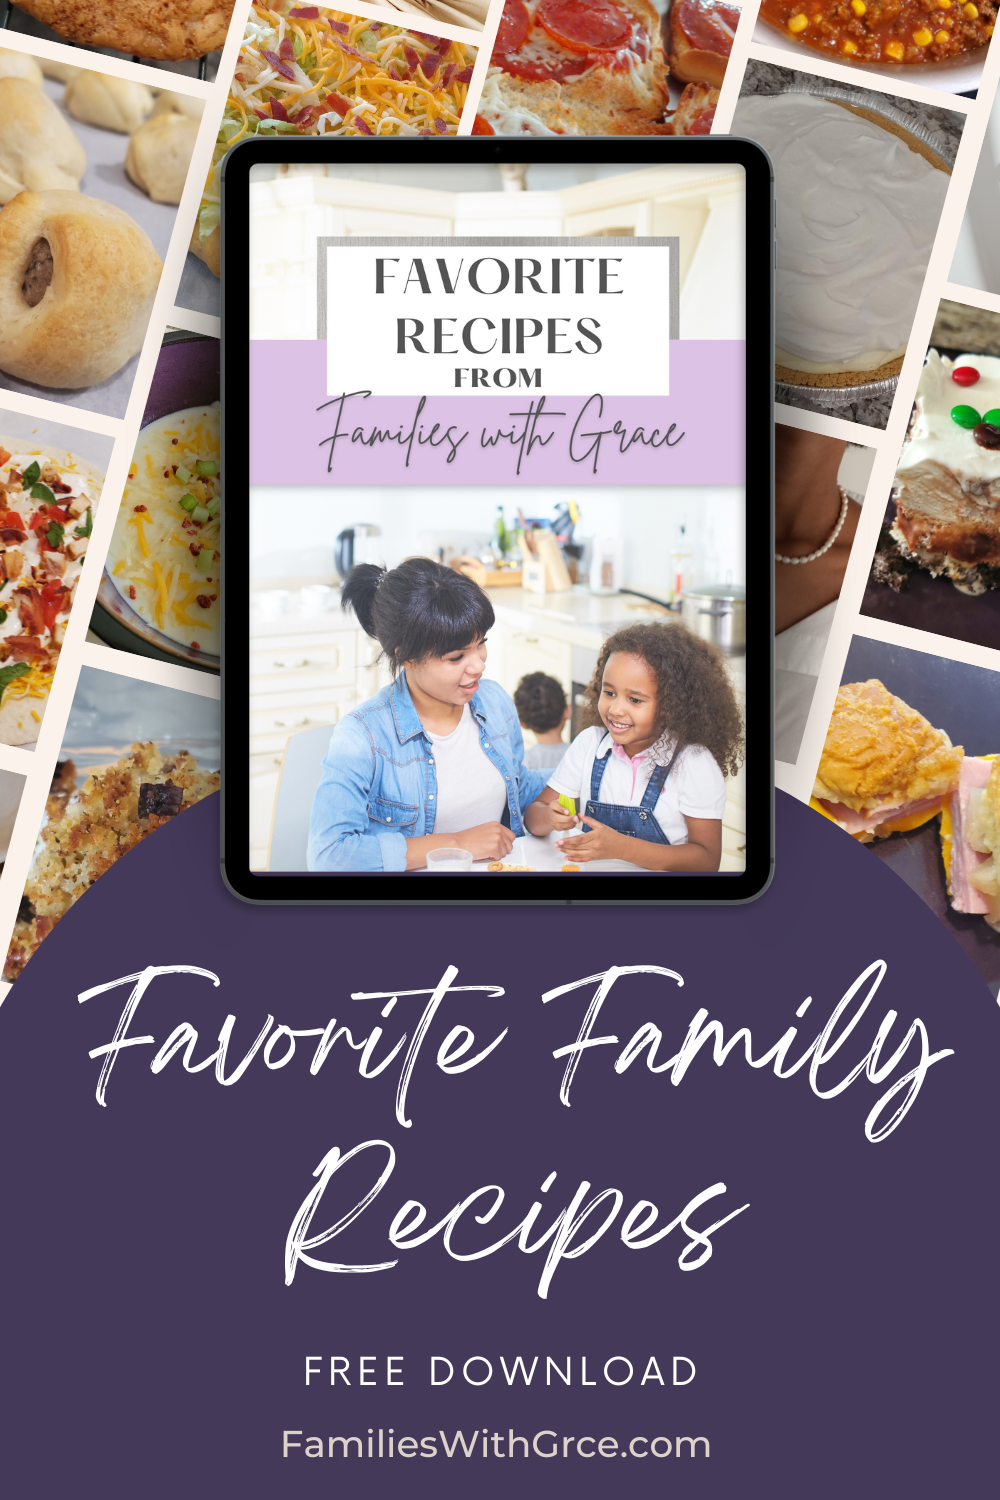 Stay up-to-date with Families with Grace